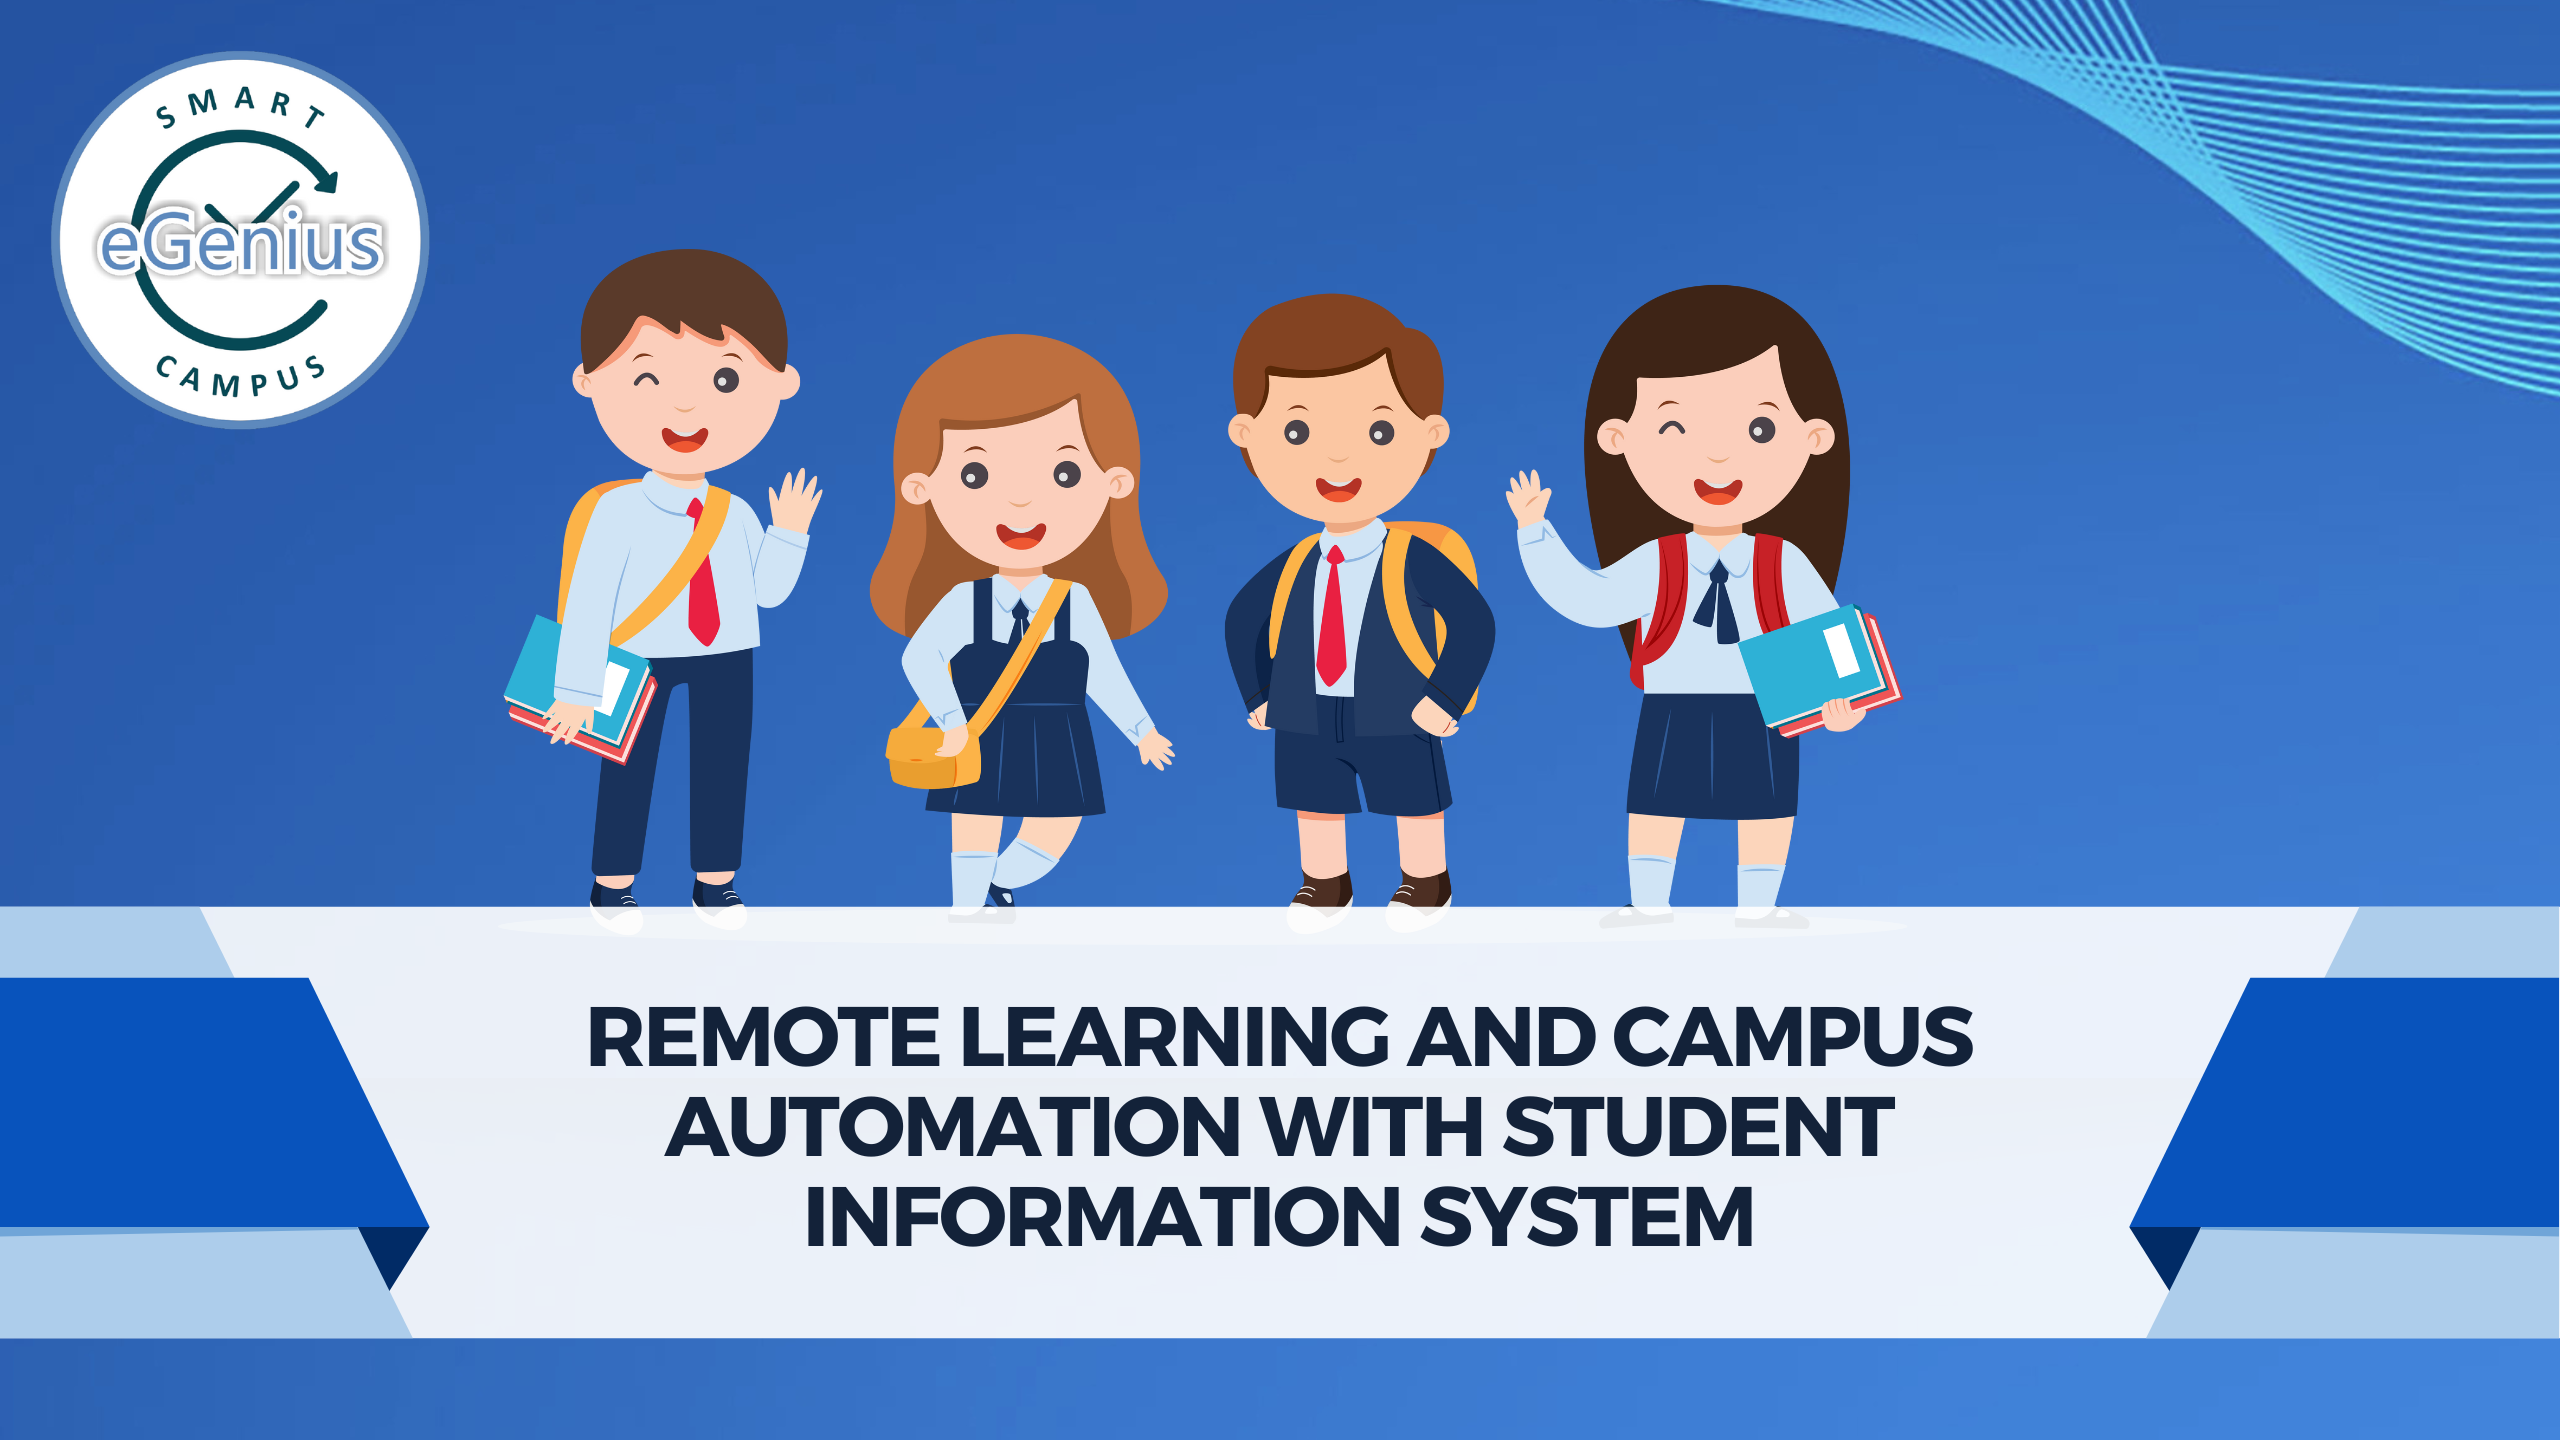 Remote Learning and Campus Automation with Student Information System  